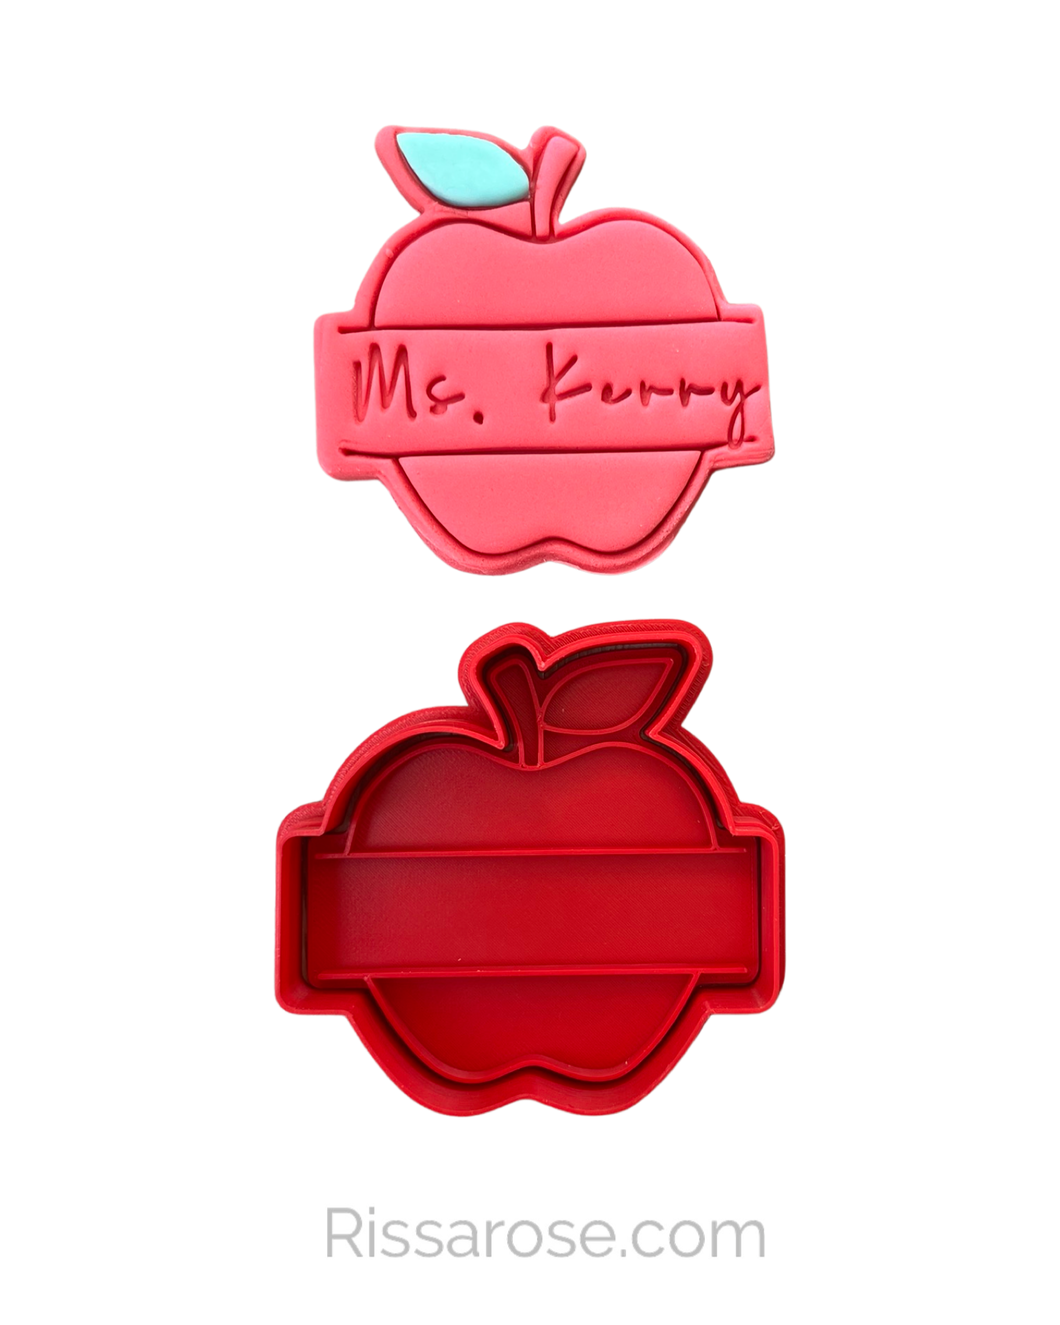 Teacher cookie cutter set thank you for helping me apple thank you sun